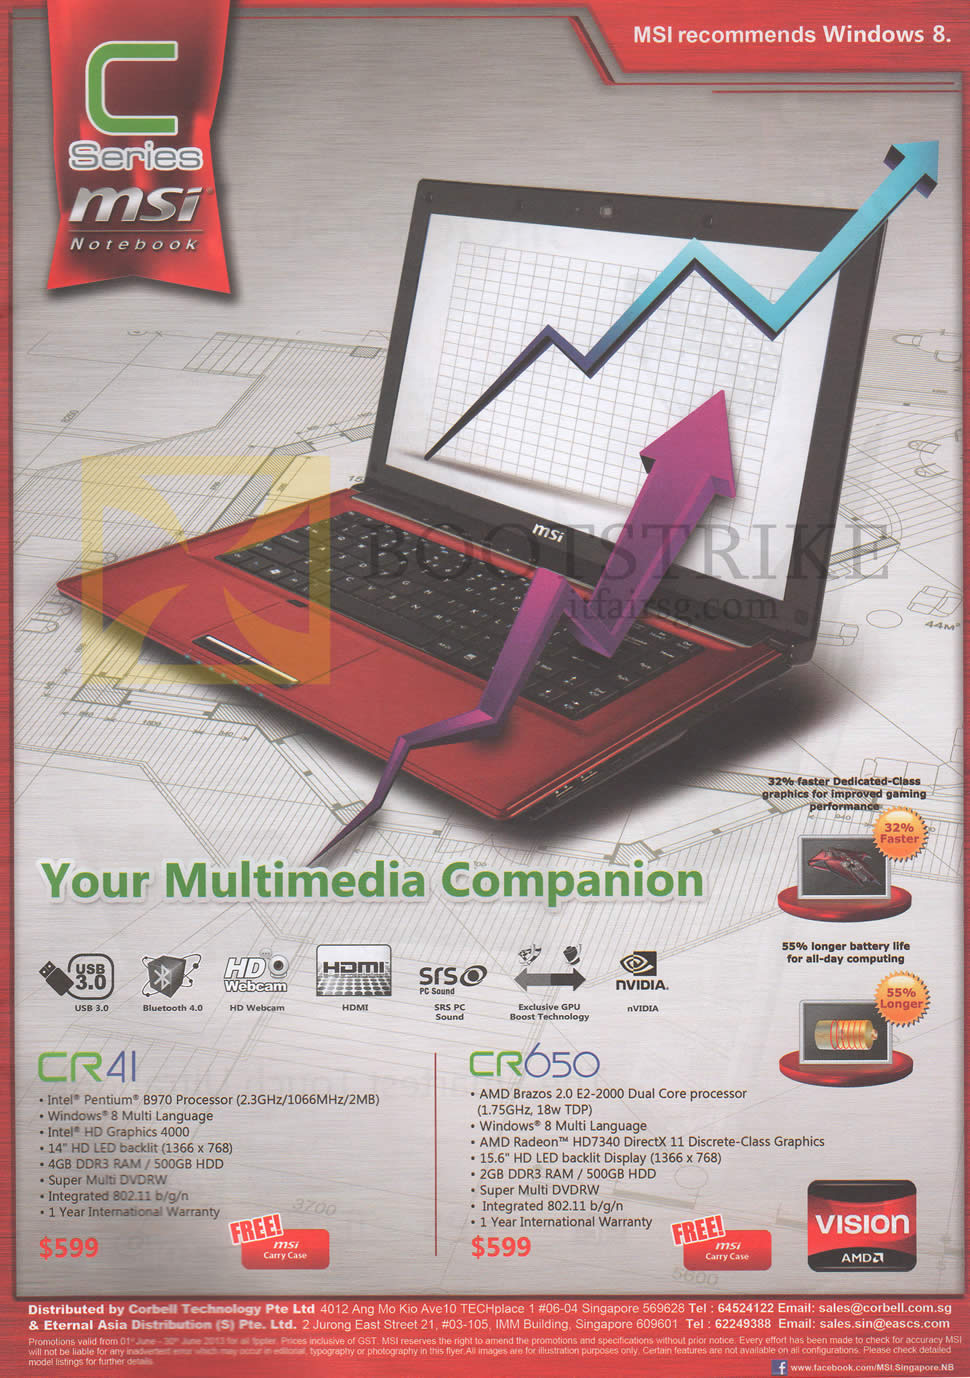 PC SHOW 2013 price list image brochure of MSI Notebooks CR41, CR650